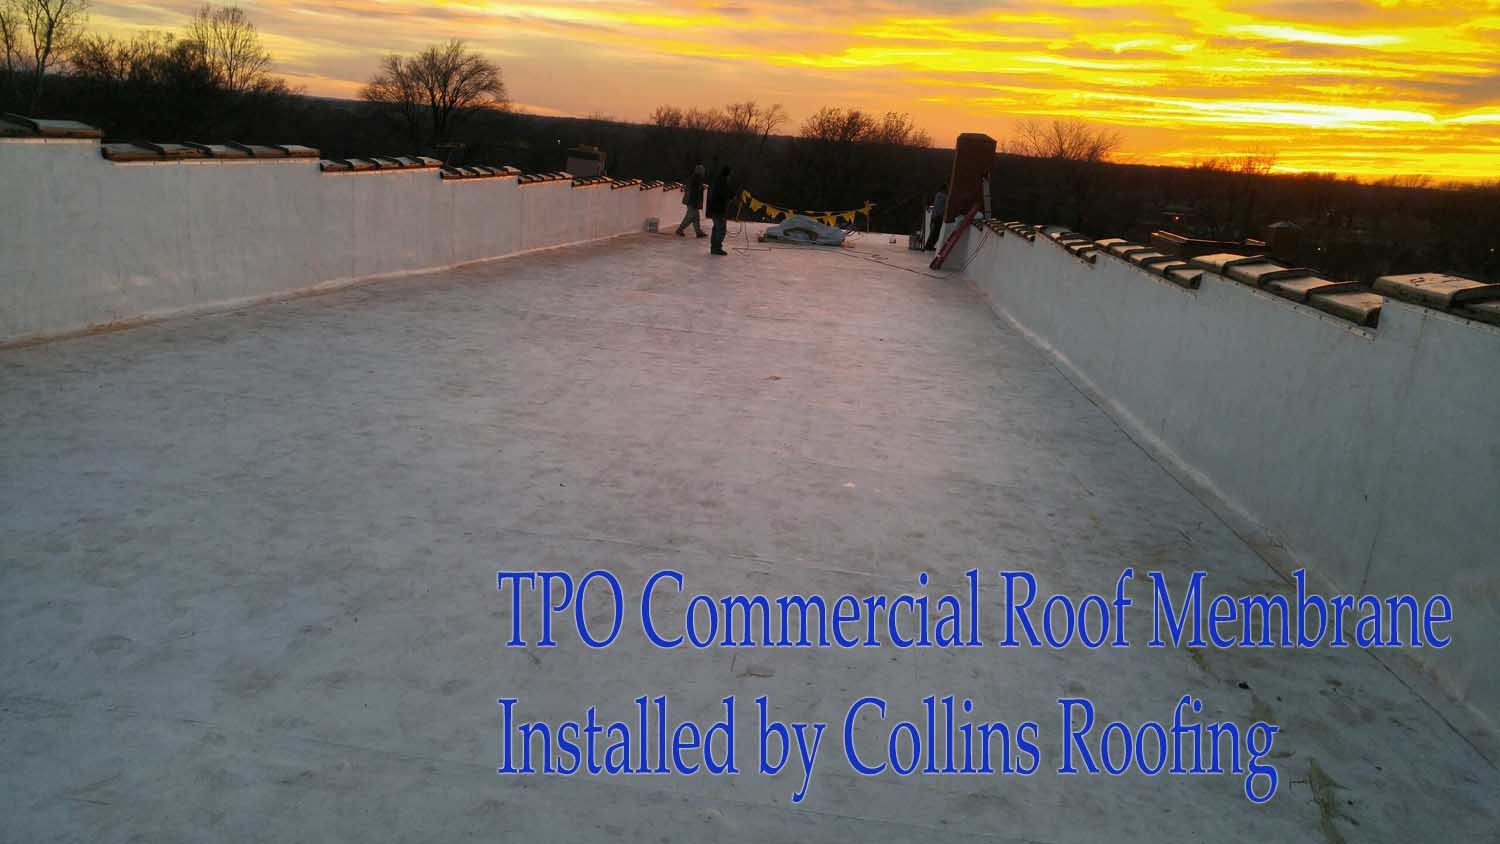 TPO Commercial Roofing in Kansas City, MO  Installed by Collins Roofing

Roofing in Kansas City, Roofing in Belton,